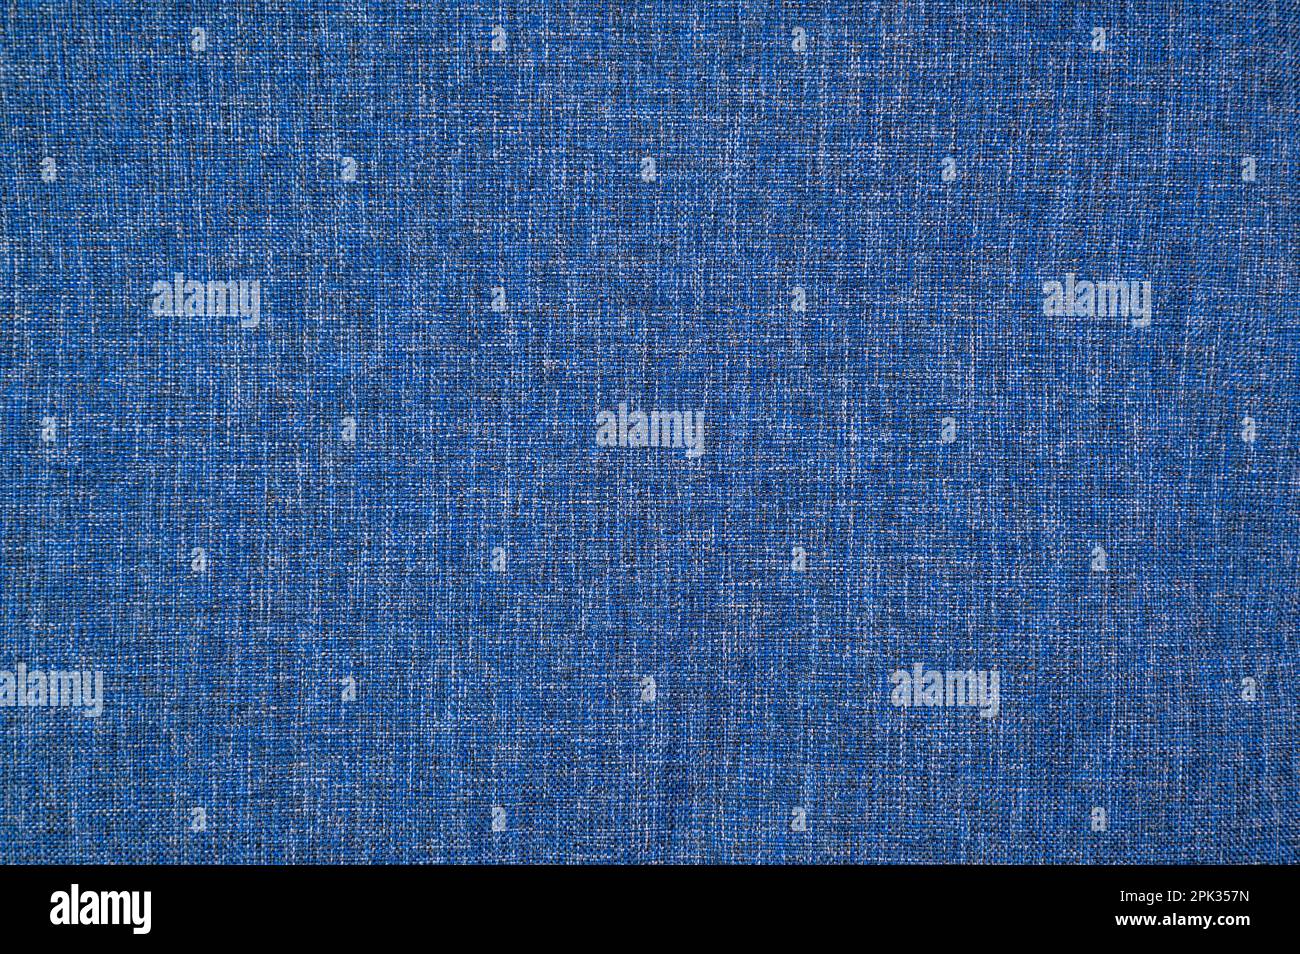 Blank navy blue cloth, fabric, textile material as backdrop, background or texture Stock Photo